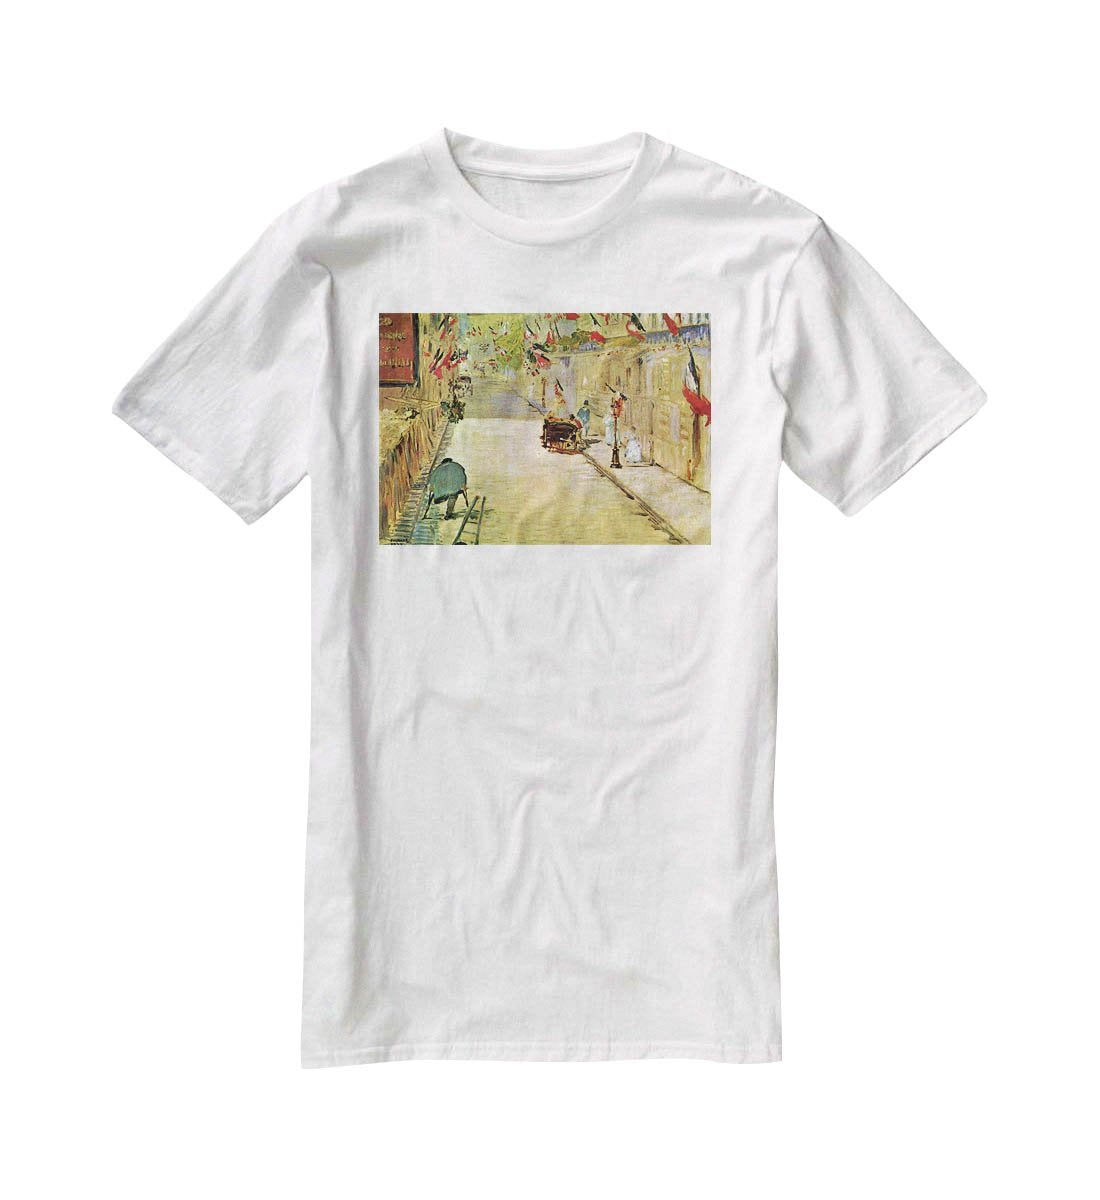 Rue Mosnier with Flags by Manet T-Shirt - Canvas Art Rocks - 5